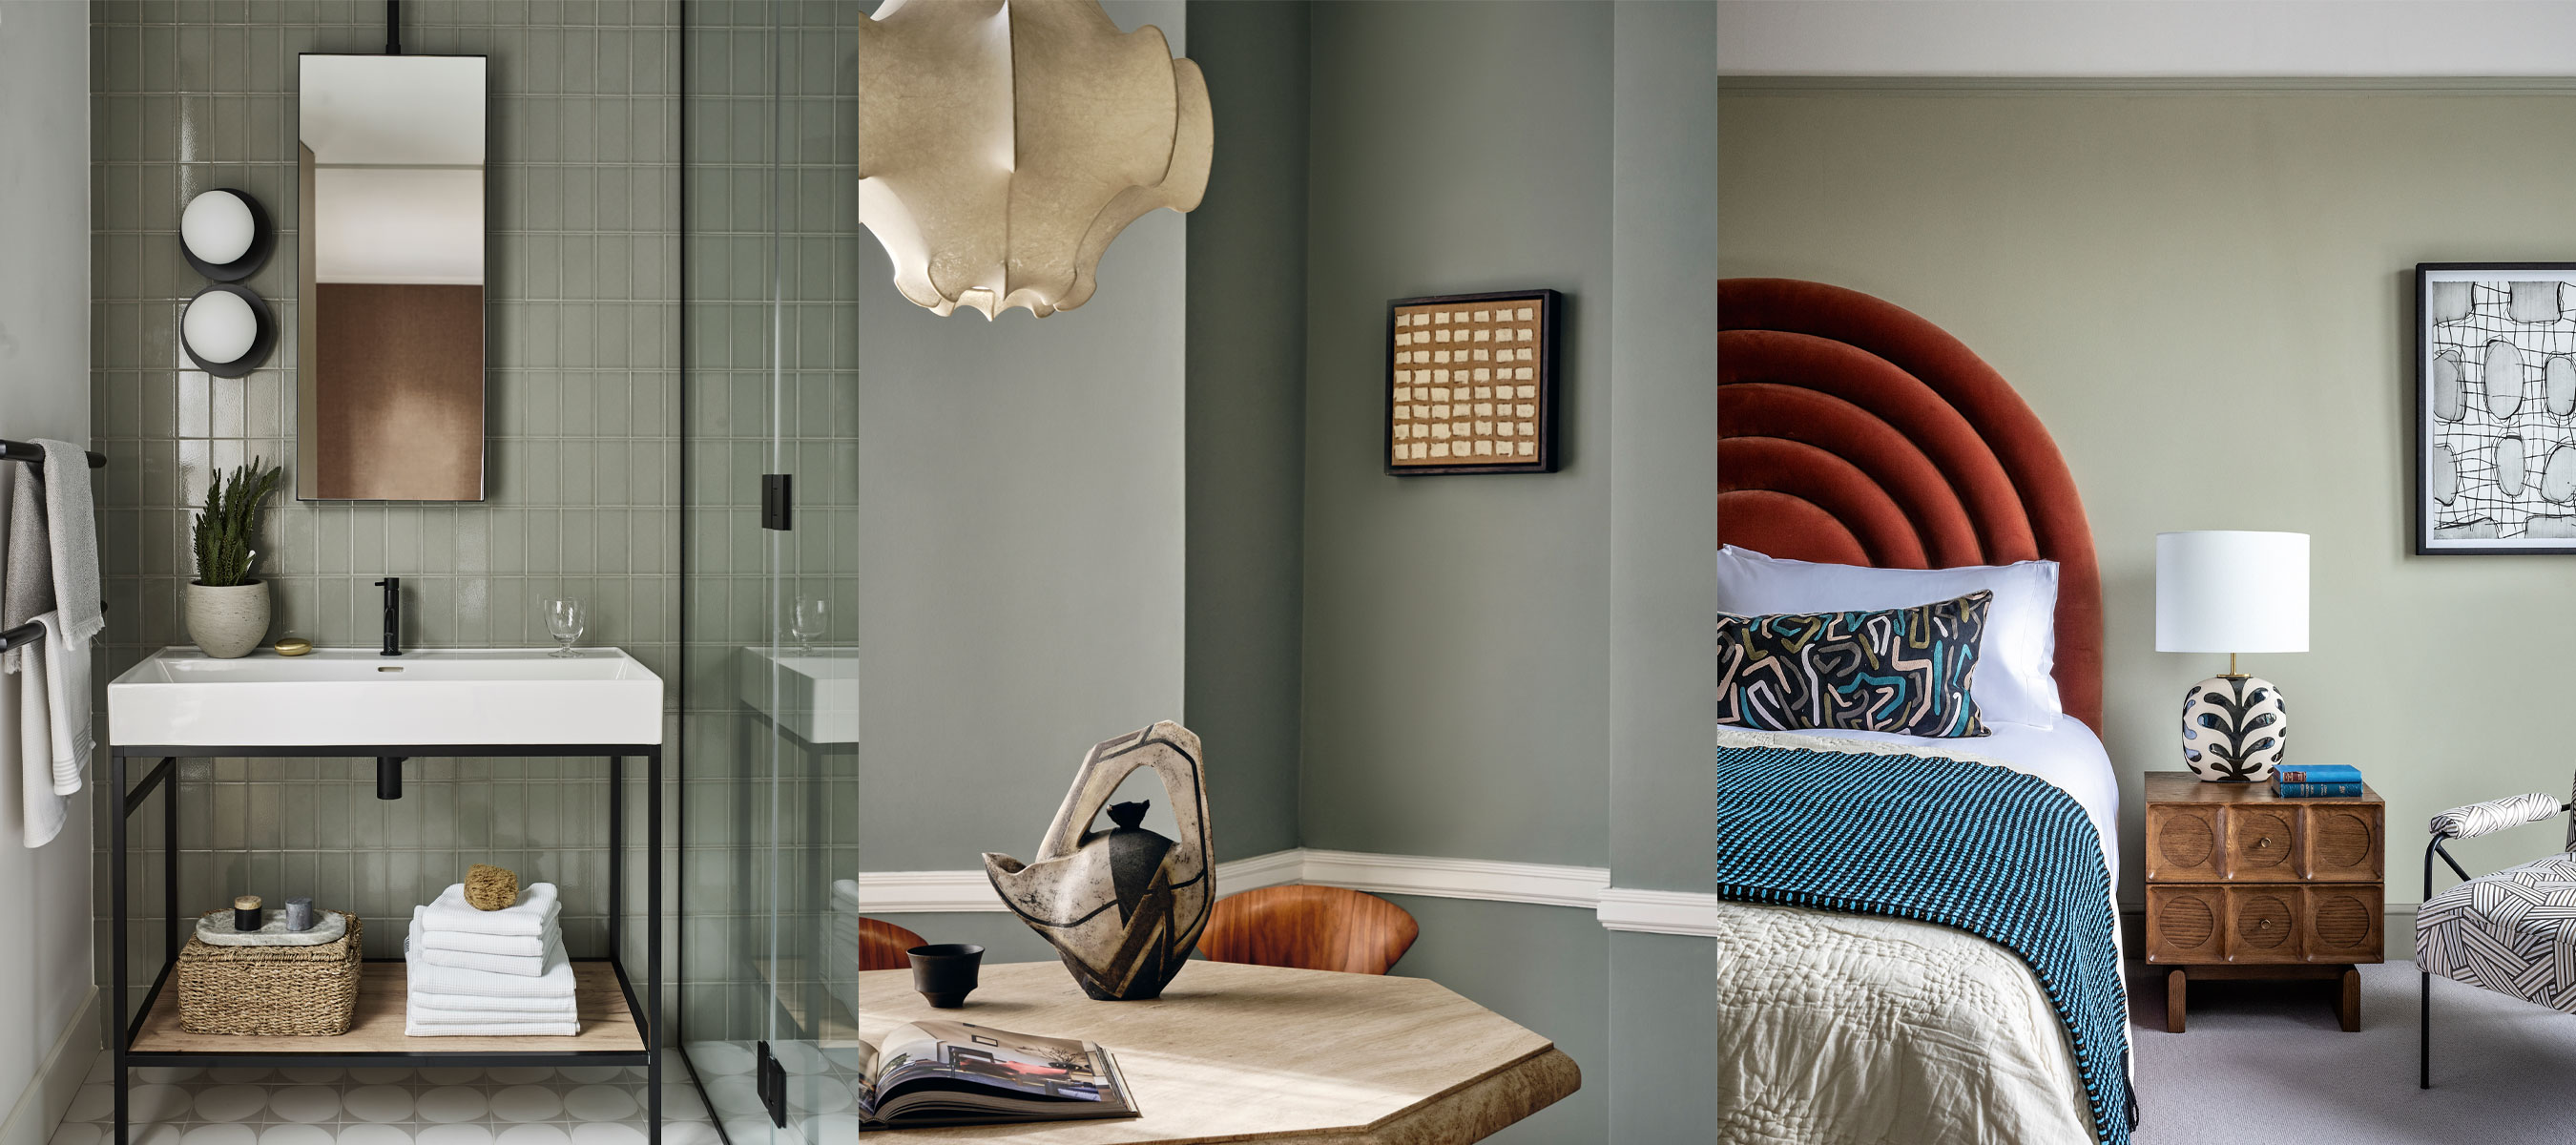 Gray-green: The new neutral shade interior designers love